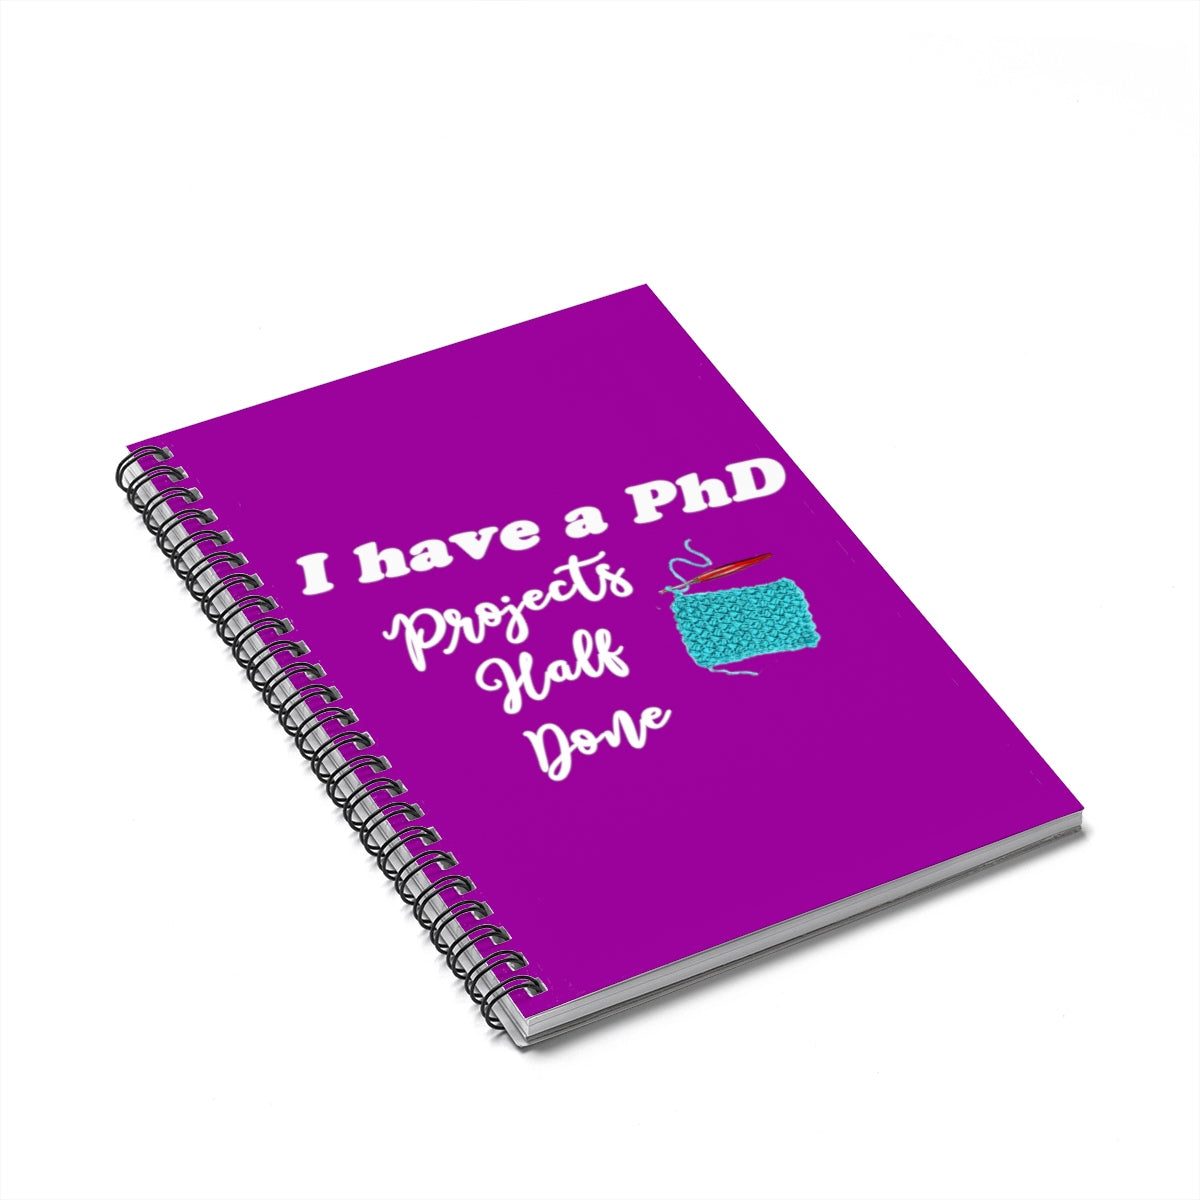 "I Have a PhD - Projects Half Done" White Letters - Spiral Notebook - Ruled Line